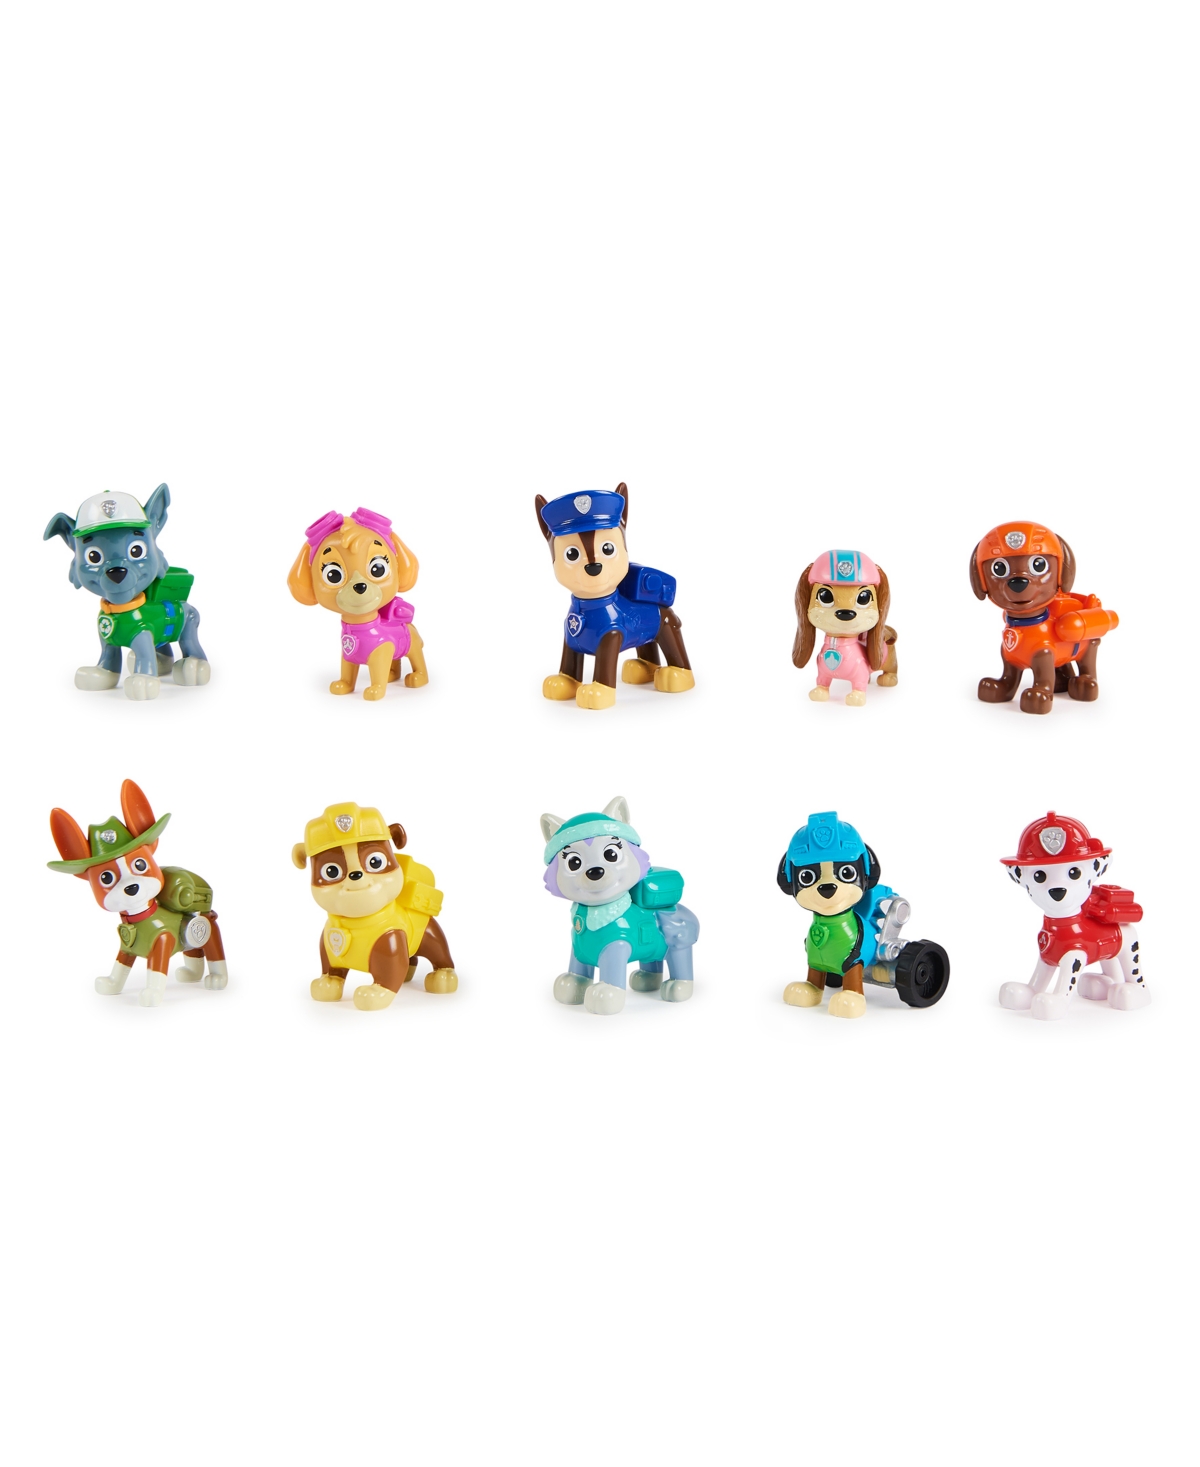 Paw Patrol All Paws On Deck Toy Figures Gift Pack With 10 Collectible Action Figures In Multi-color